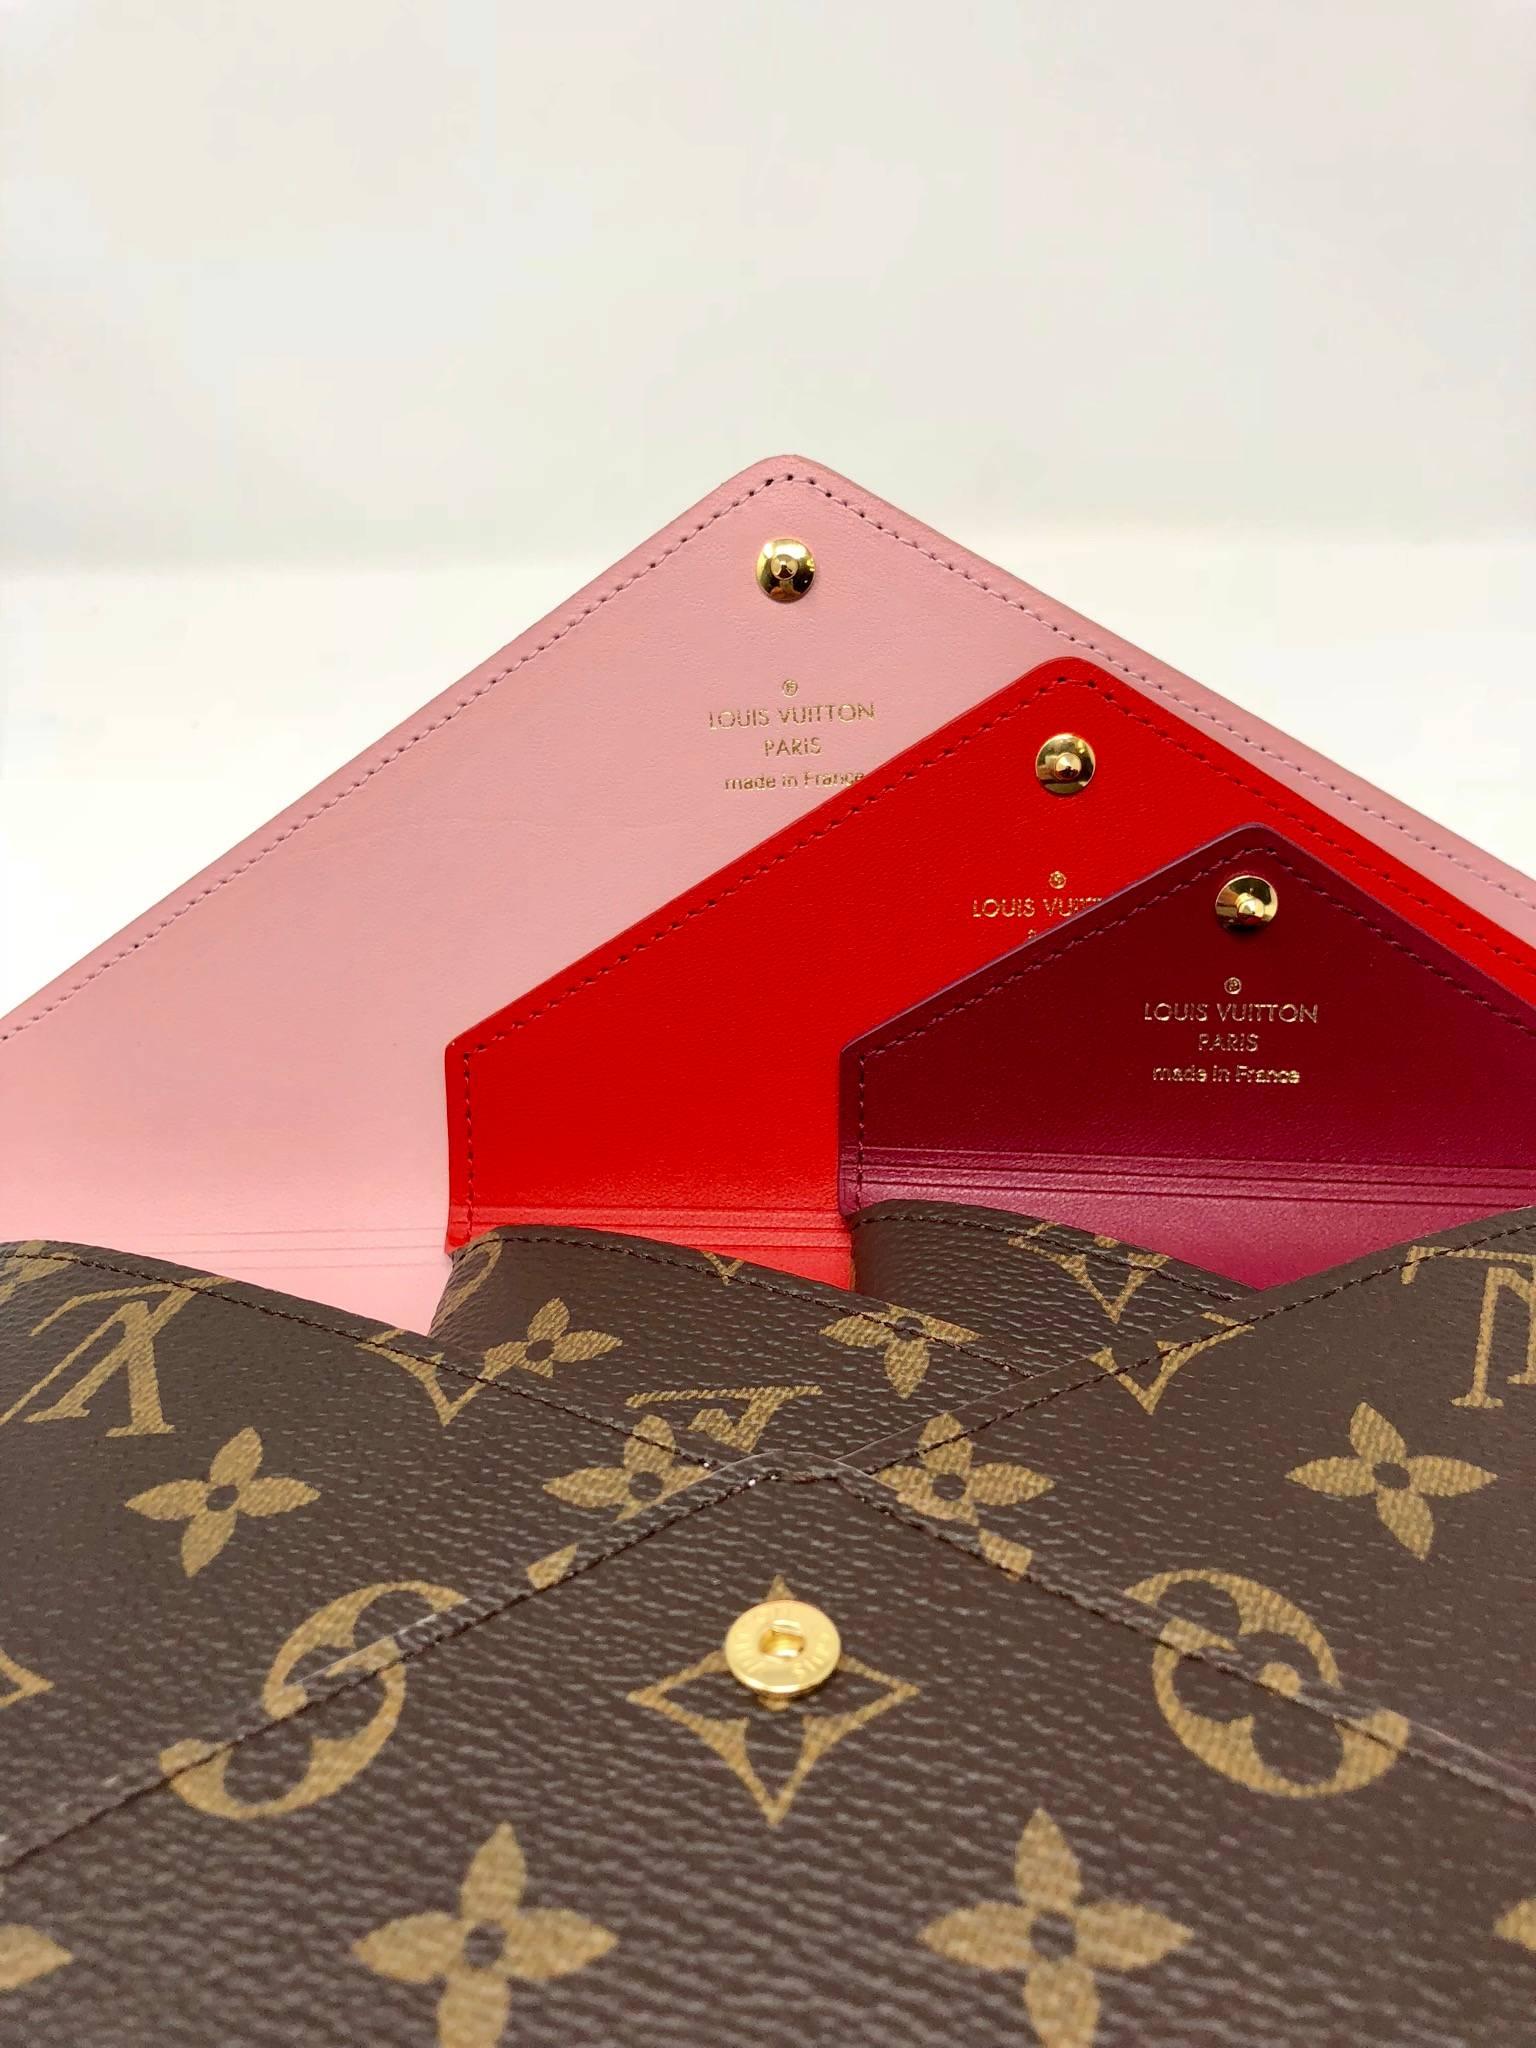 Louis Vuitton Kirigami Set. This set comes with three pouches ranging in sizing. The largest pouch has a light pink interior, the medium size has a red interior, and the smallest has a burgundy interior. This item is in pristine condition and